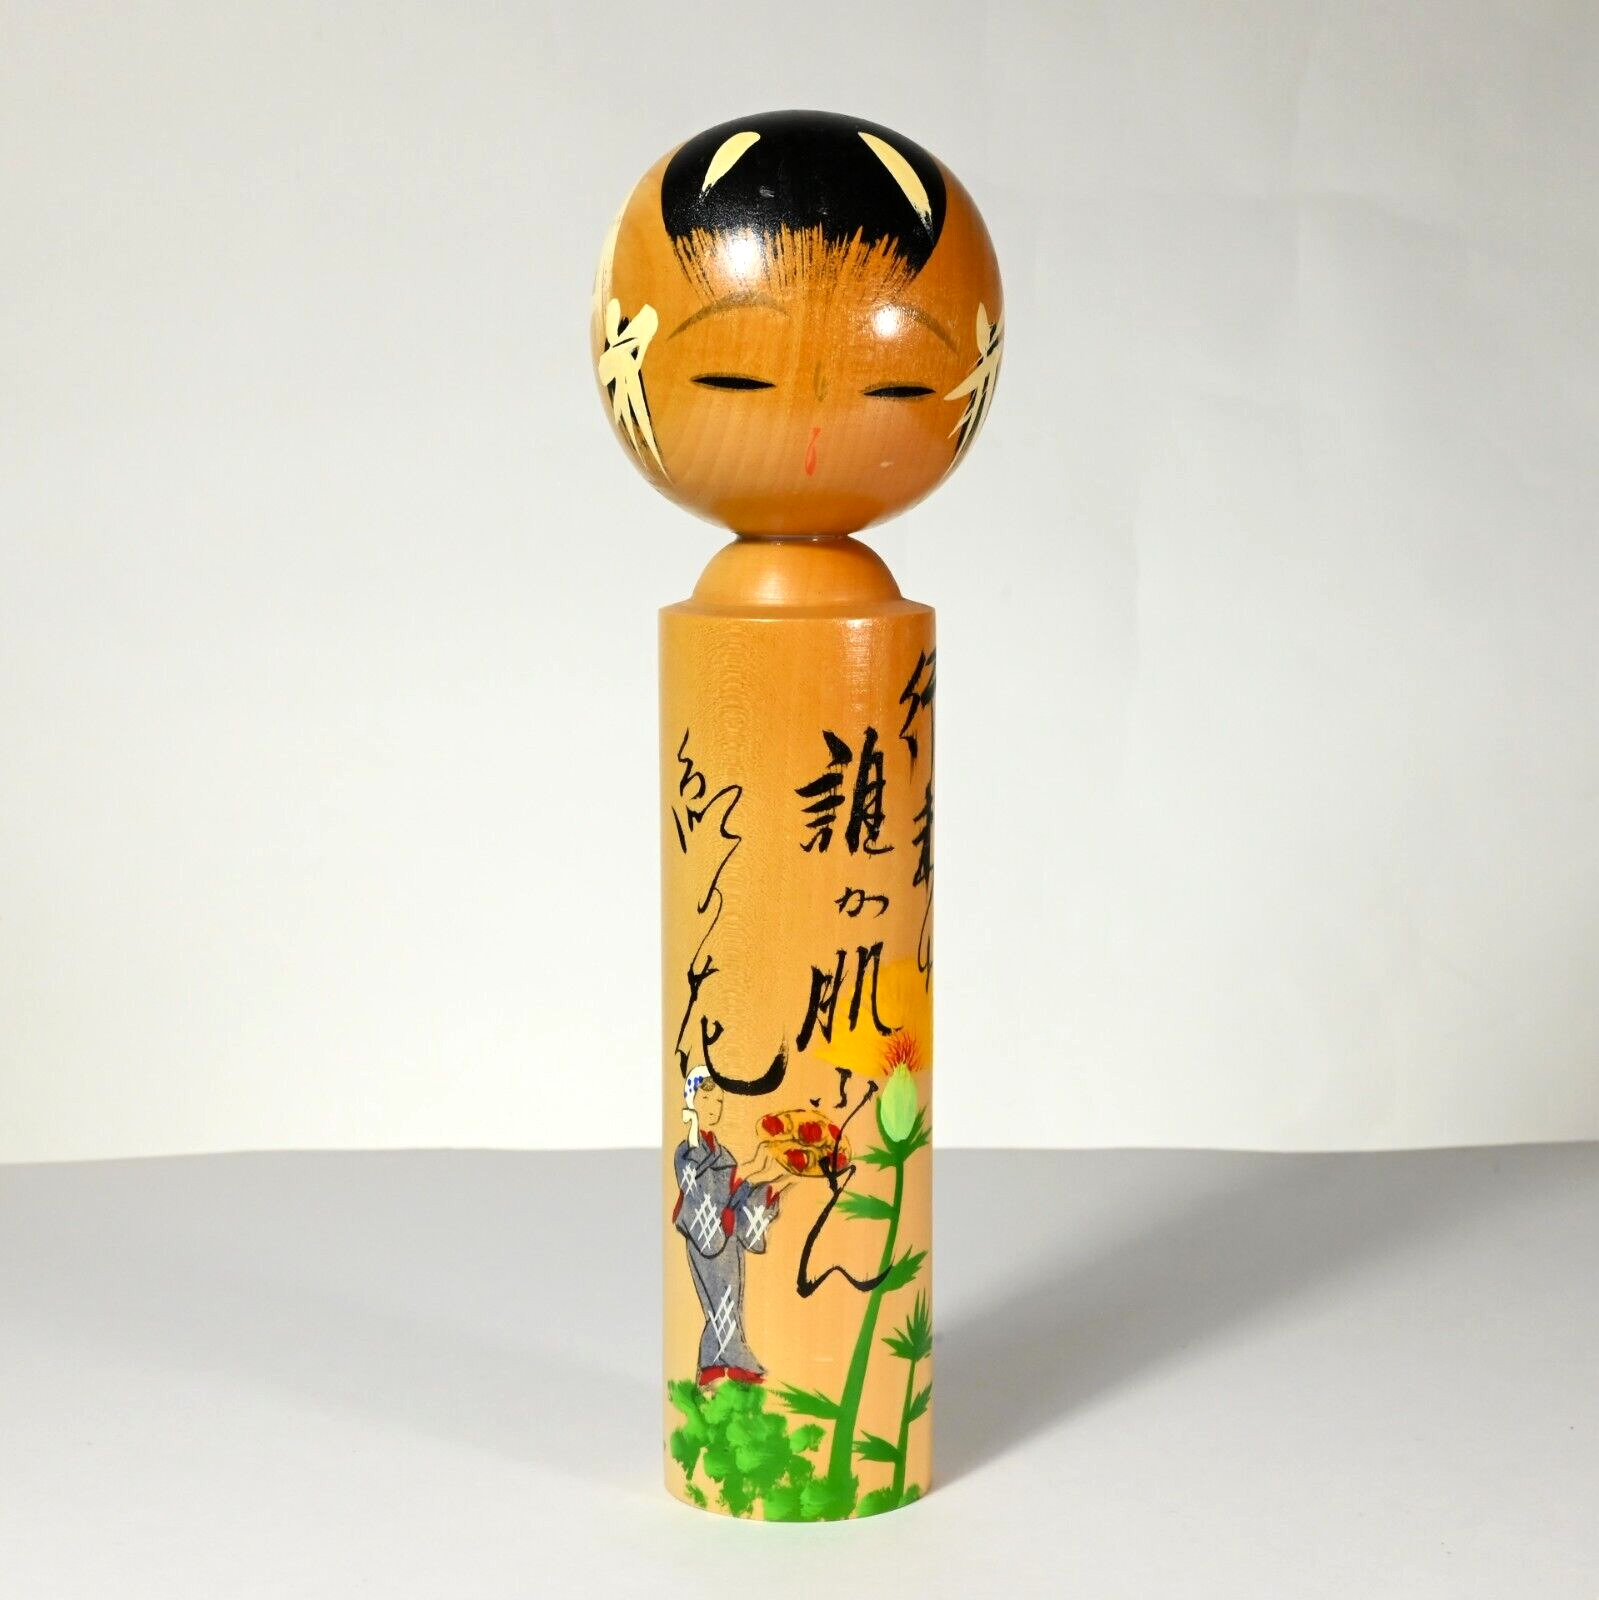 Vintage Creative KOKESHI Wooden Doll, Japan - 10.7 inches, Signed by the Artist